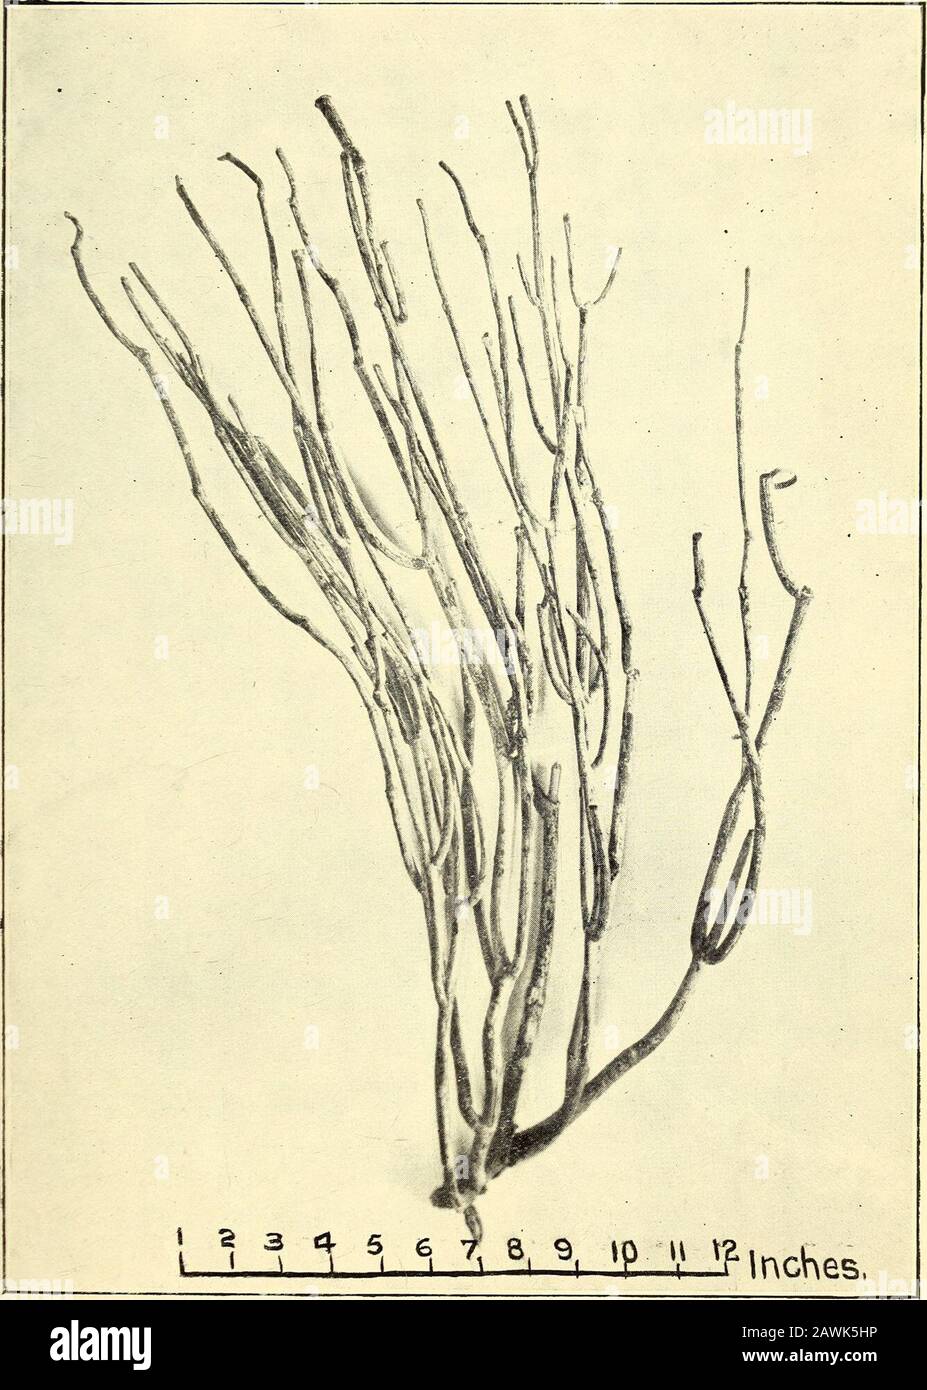 Journal and proceedings of the Royal Society of New South Wales . quantity,this product should have commercial value. The accompanying illustration of the material workedupon indicates that Sarcostemma australe grows as a leaf-less shrub, although it is described in the Flora Australiensisas a twiner. That the plant assumes both forms of growthhas already been shown, and Tate (Journ. Proc. Roy. Soc,South Australia, iv, 136) describes it as a shrub two orthree feet high, growing on the granitoid-felstone cliffsabout Tickera, S.A., and also as a twiner in other localities(same Journ., v, 9). Mr. Stock Photo